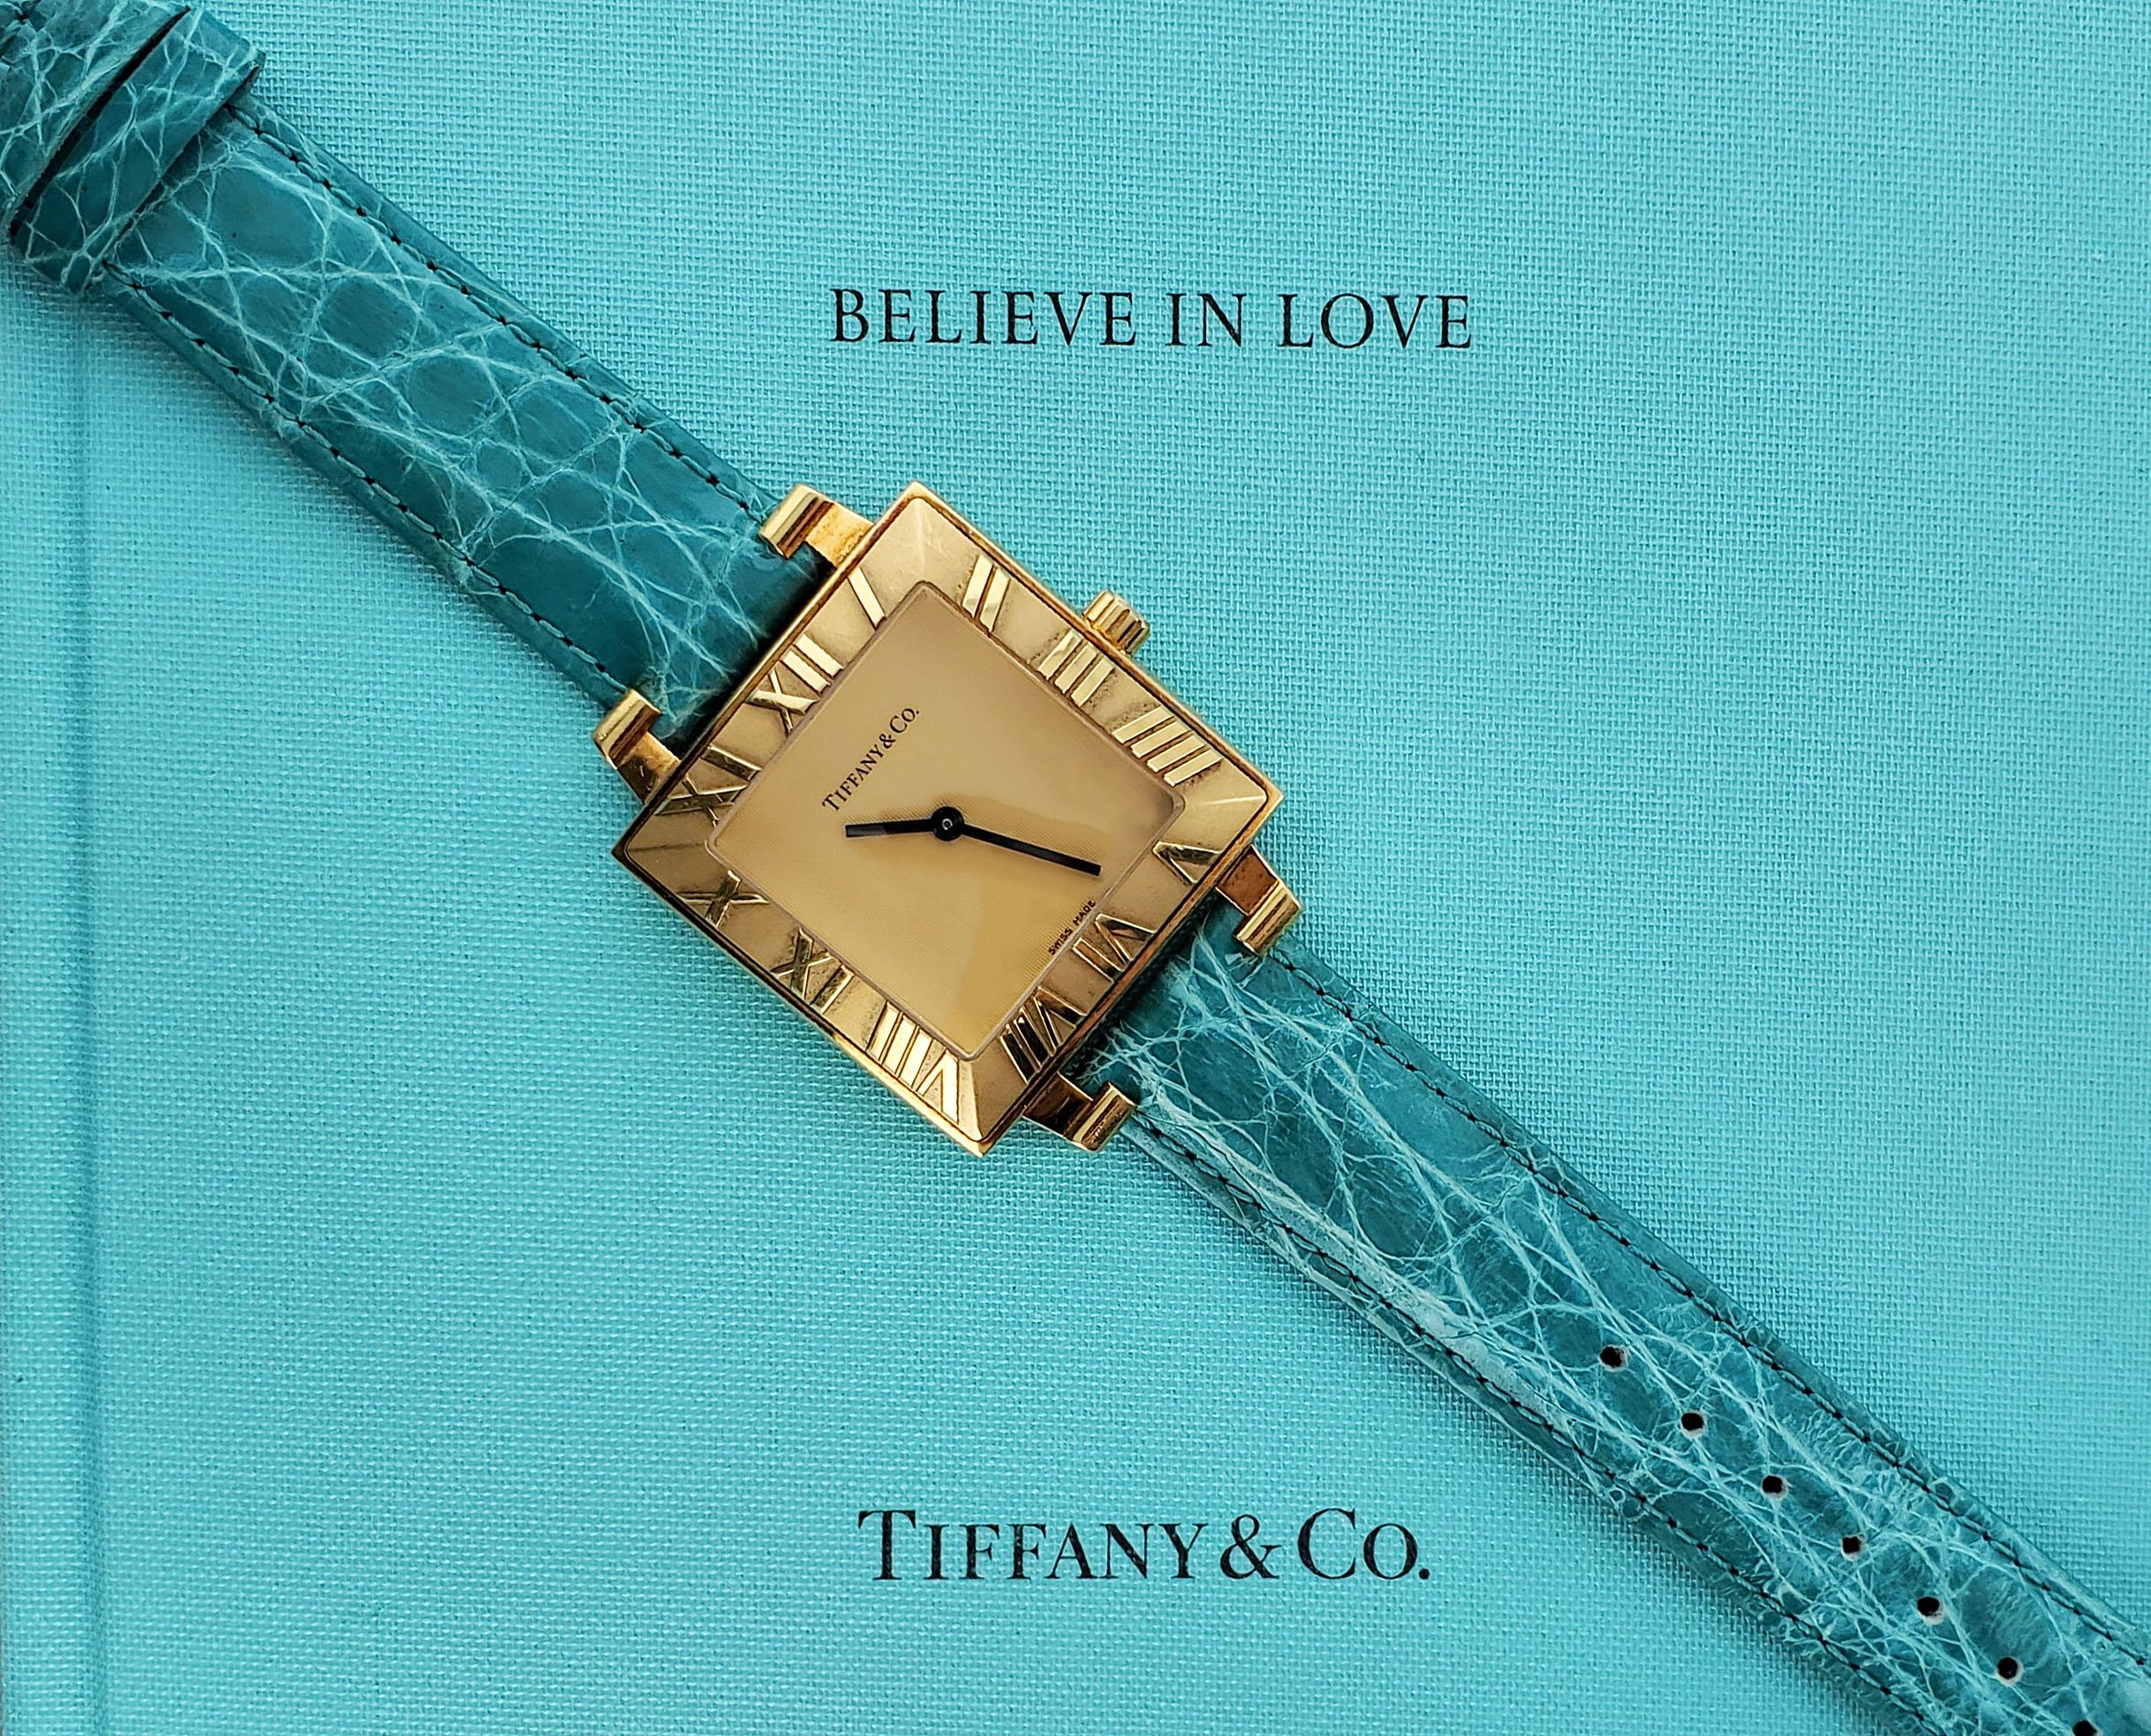 Item Details

Estimated Retail $4,500.00
Brand Tiffany & Co
Collection Atlas
Case Material Yellow Gold
Gender Unisex
Movement Quartz Battery
Band Type 2pc Strp
Case Size 32 mm
Style Dress
Model Tiffany & Co Atlas

In 1837, Tiffany & Co. was founded